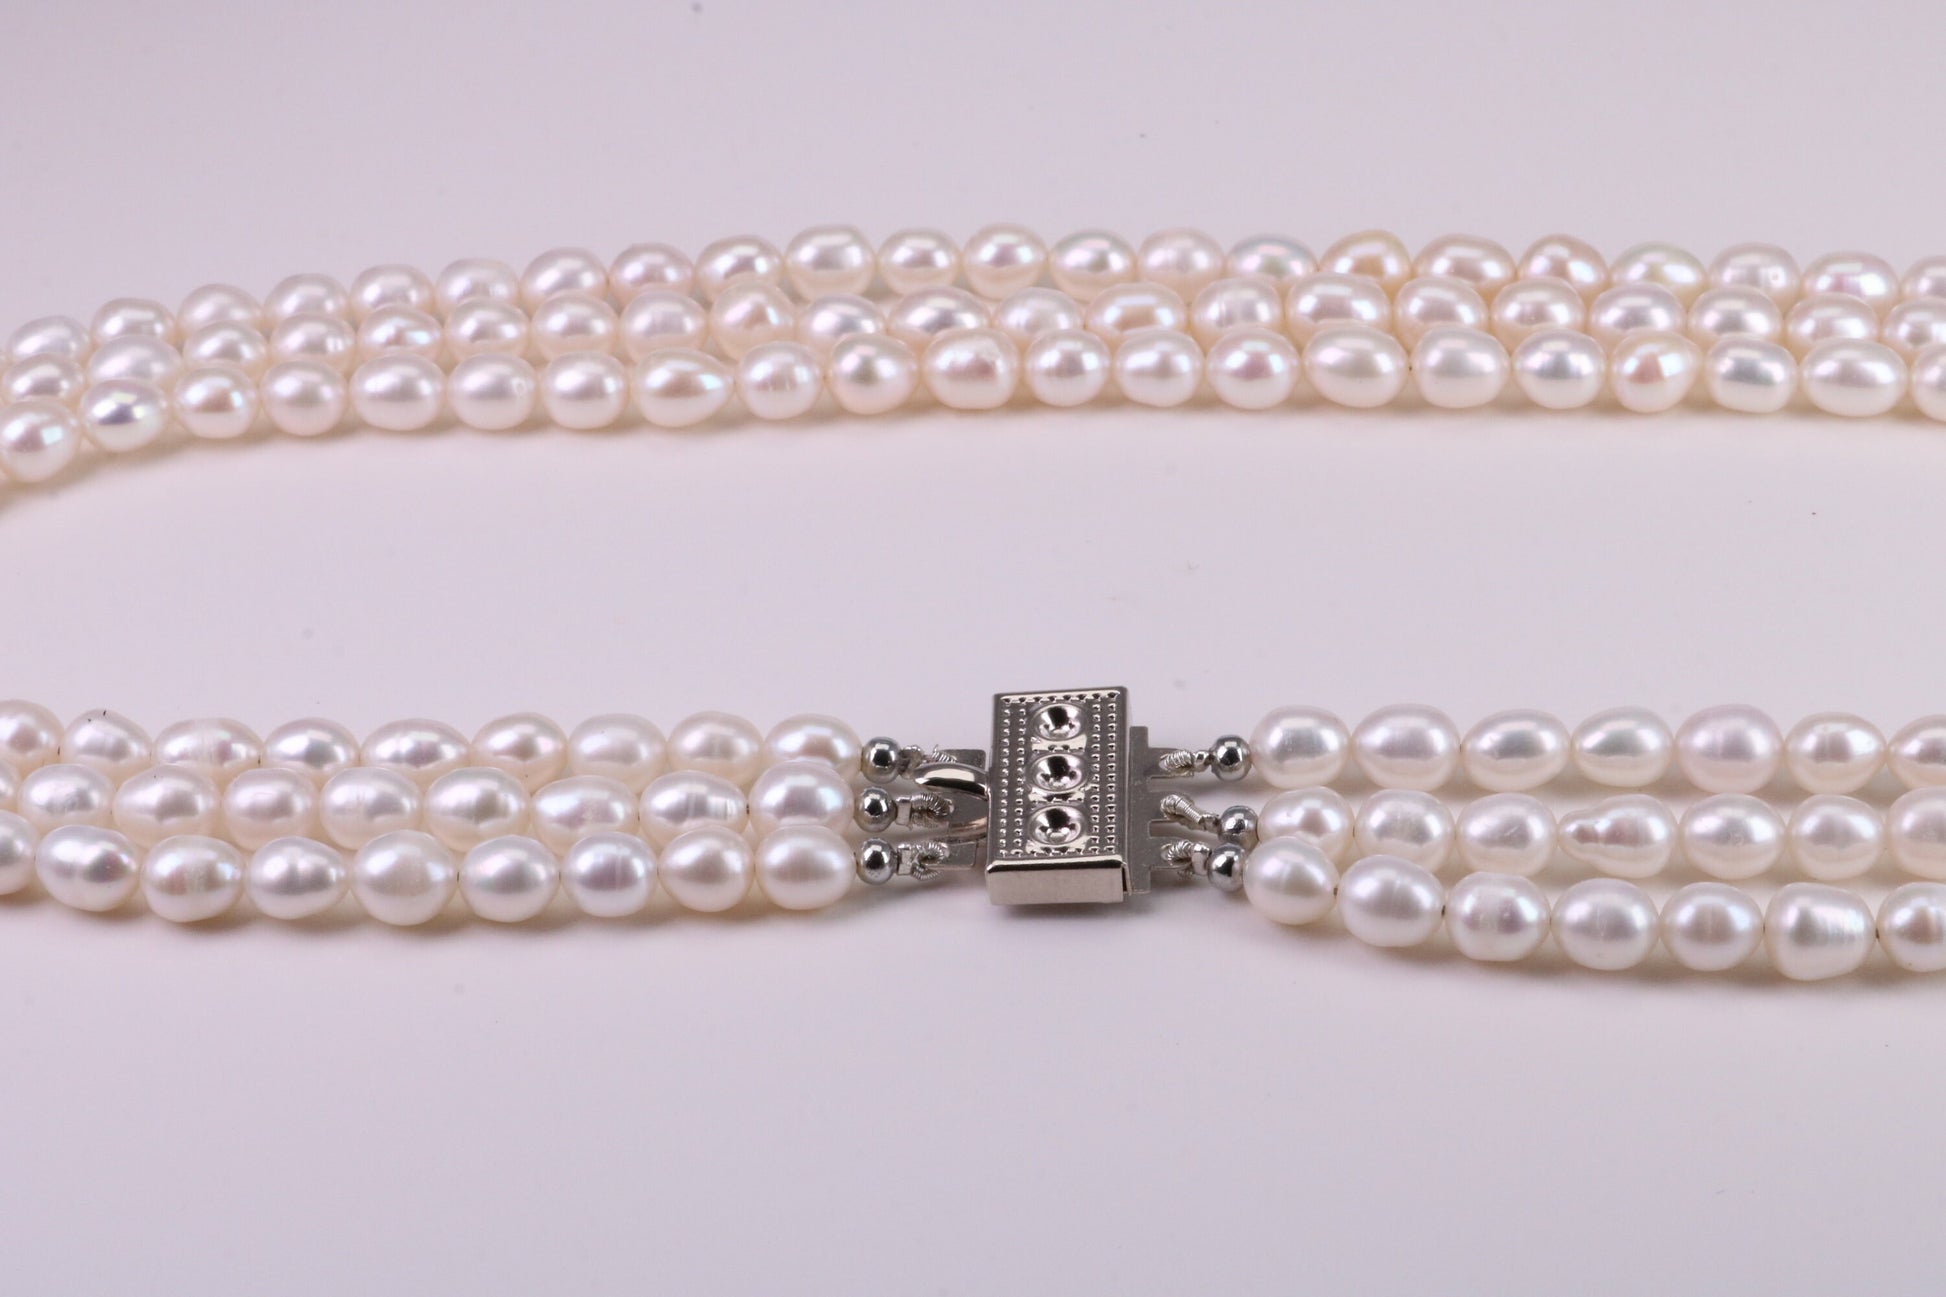 Three Strand Natural 7 mm Oval Shaped Pearl Necklace set in Silver, Three Strands Measures 16, 18 and 20 inches Long